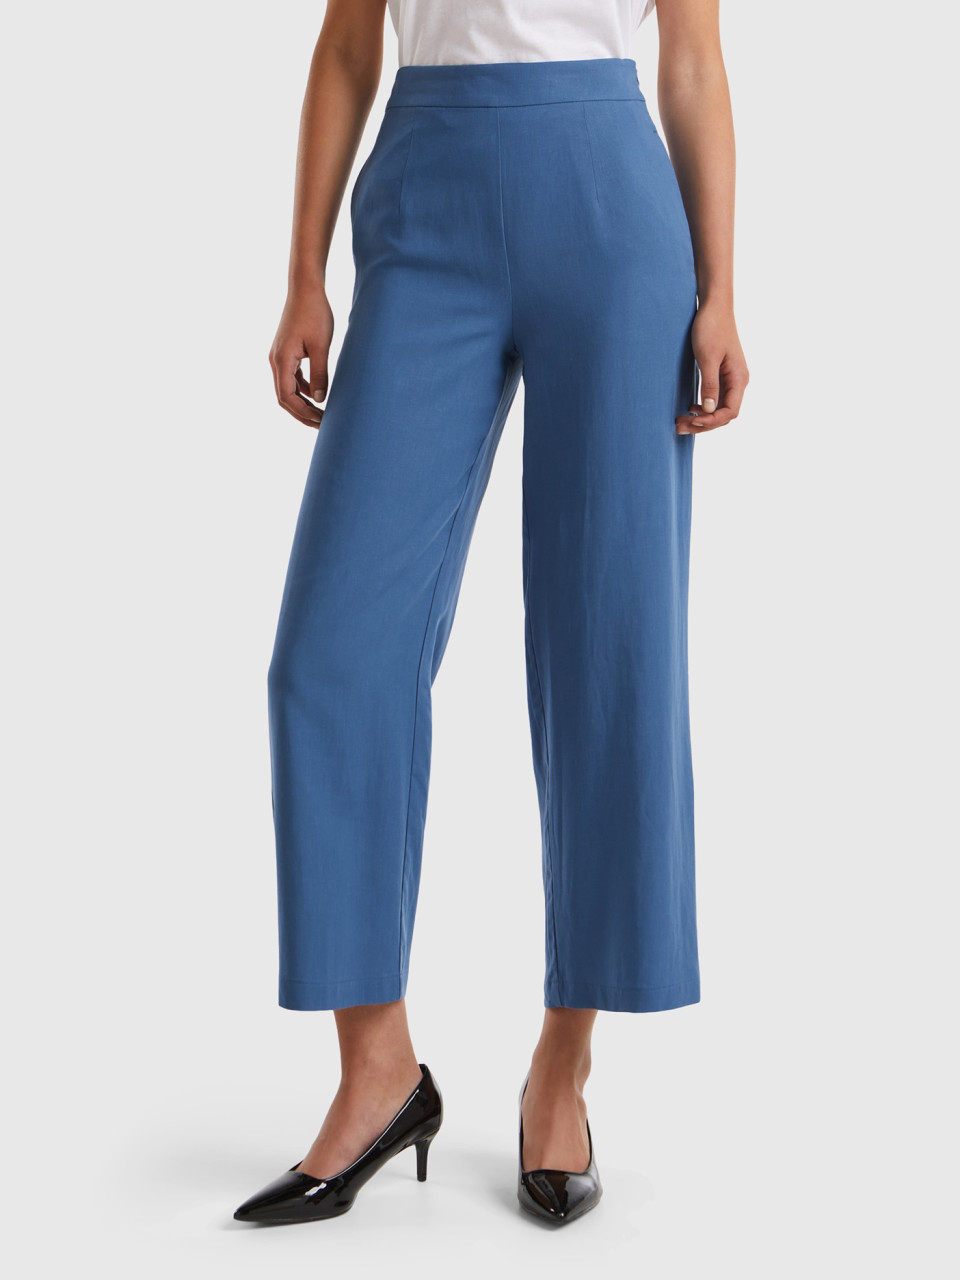 Benetton, Cropped Trousers In Sustainable Viscose Blend, Air Force Blue, Women